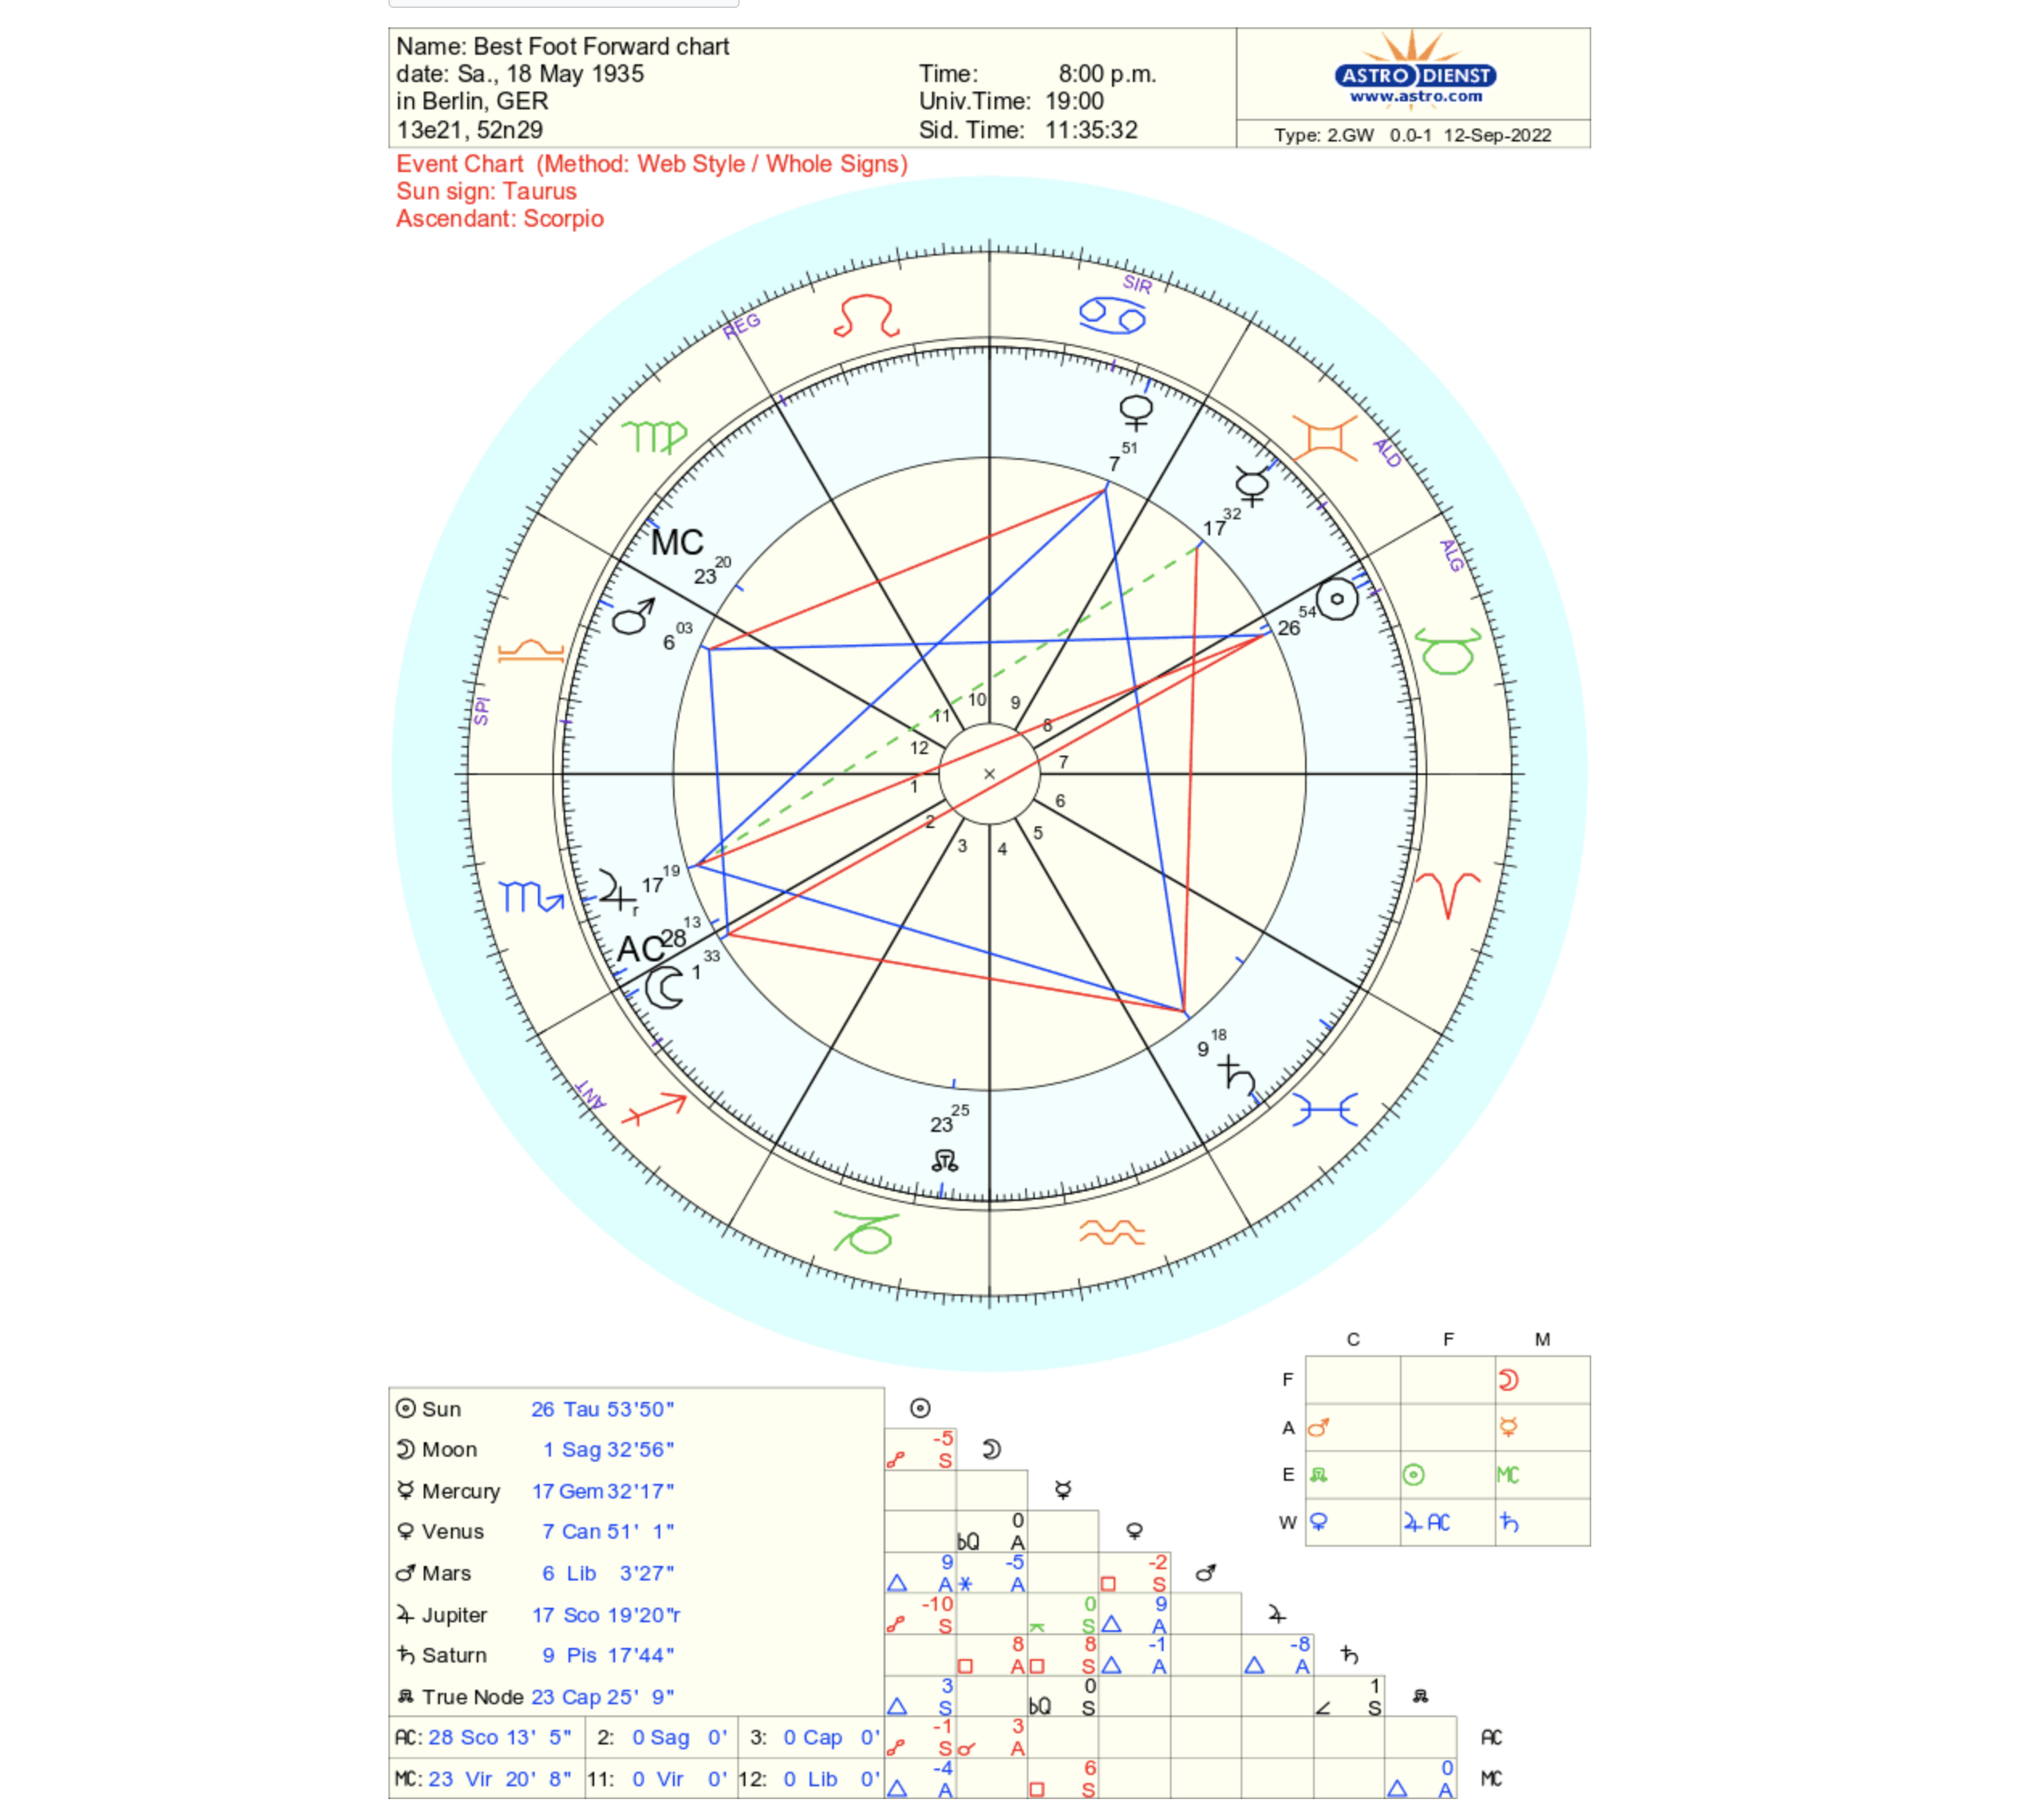 An astrology chart, relevant aspects described in the text. 